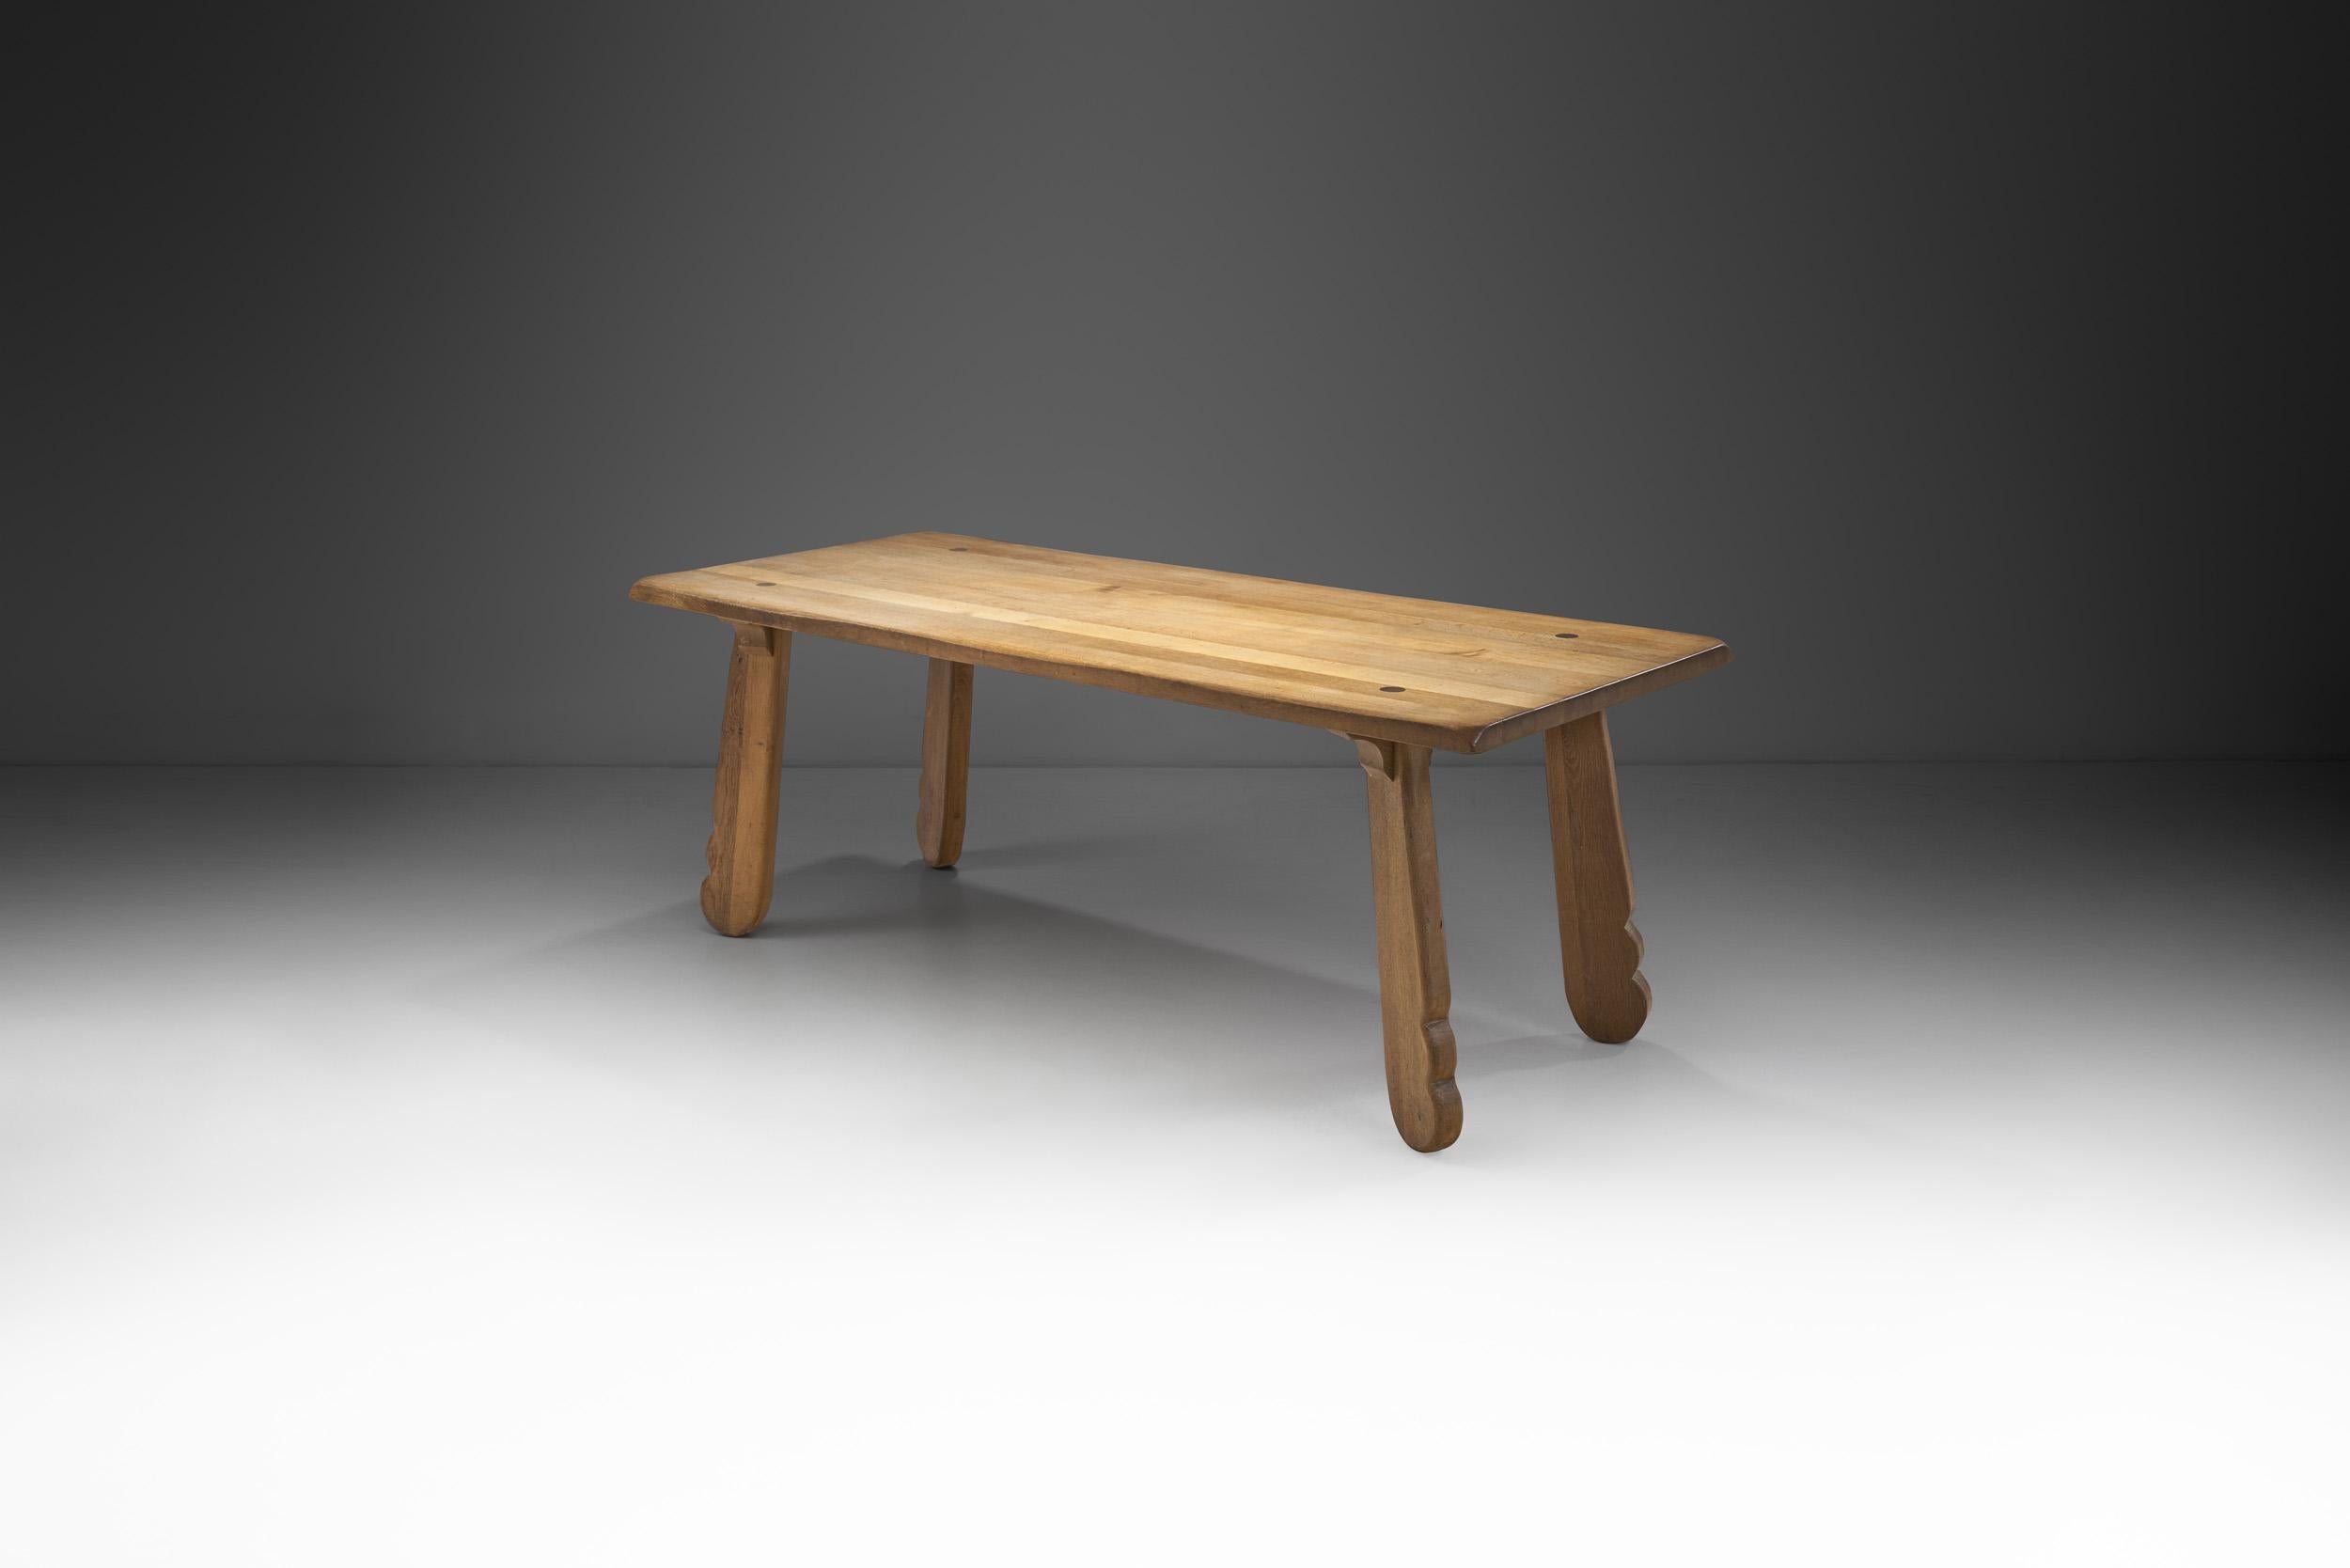 Technical ingenuity and mastery are indispensable and fuel each other to achieve equally sublime and atmospheric results in The Puydt furniture. This rare oak dining table is an exceptional piece that is just as stunning as it is hard to come